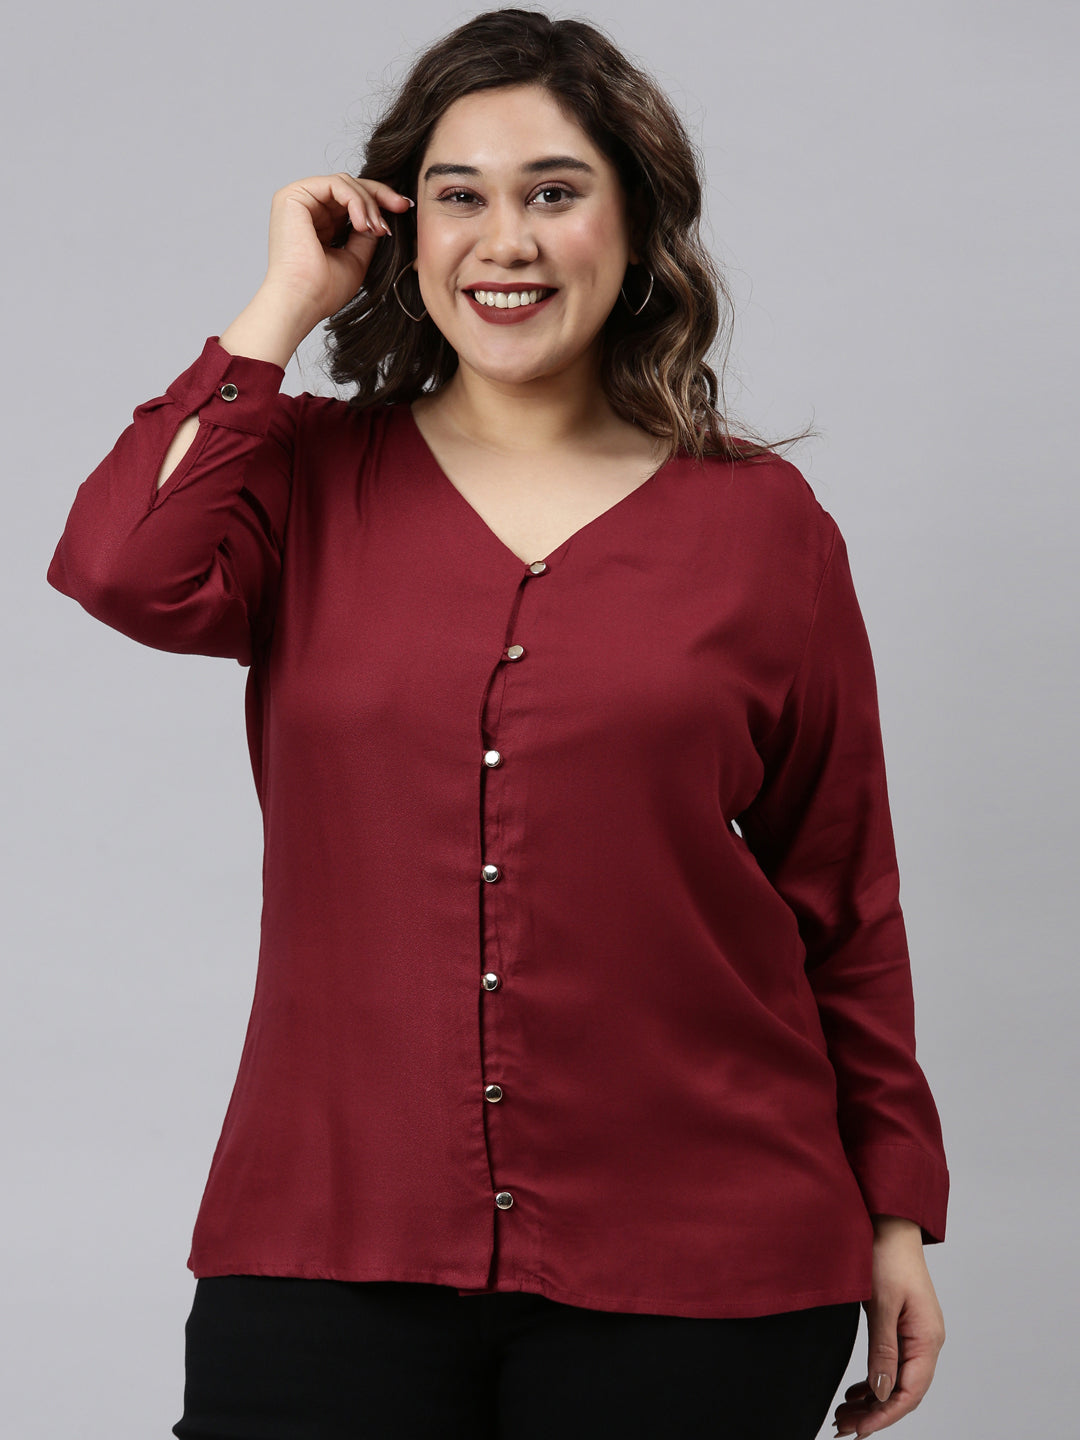 SOLID BUTTON SHIRT STYLE BURGUNDY TOP